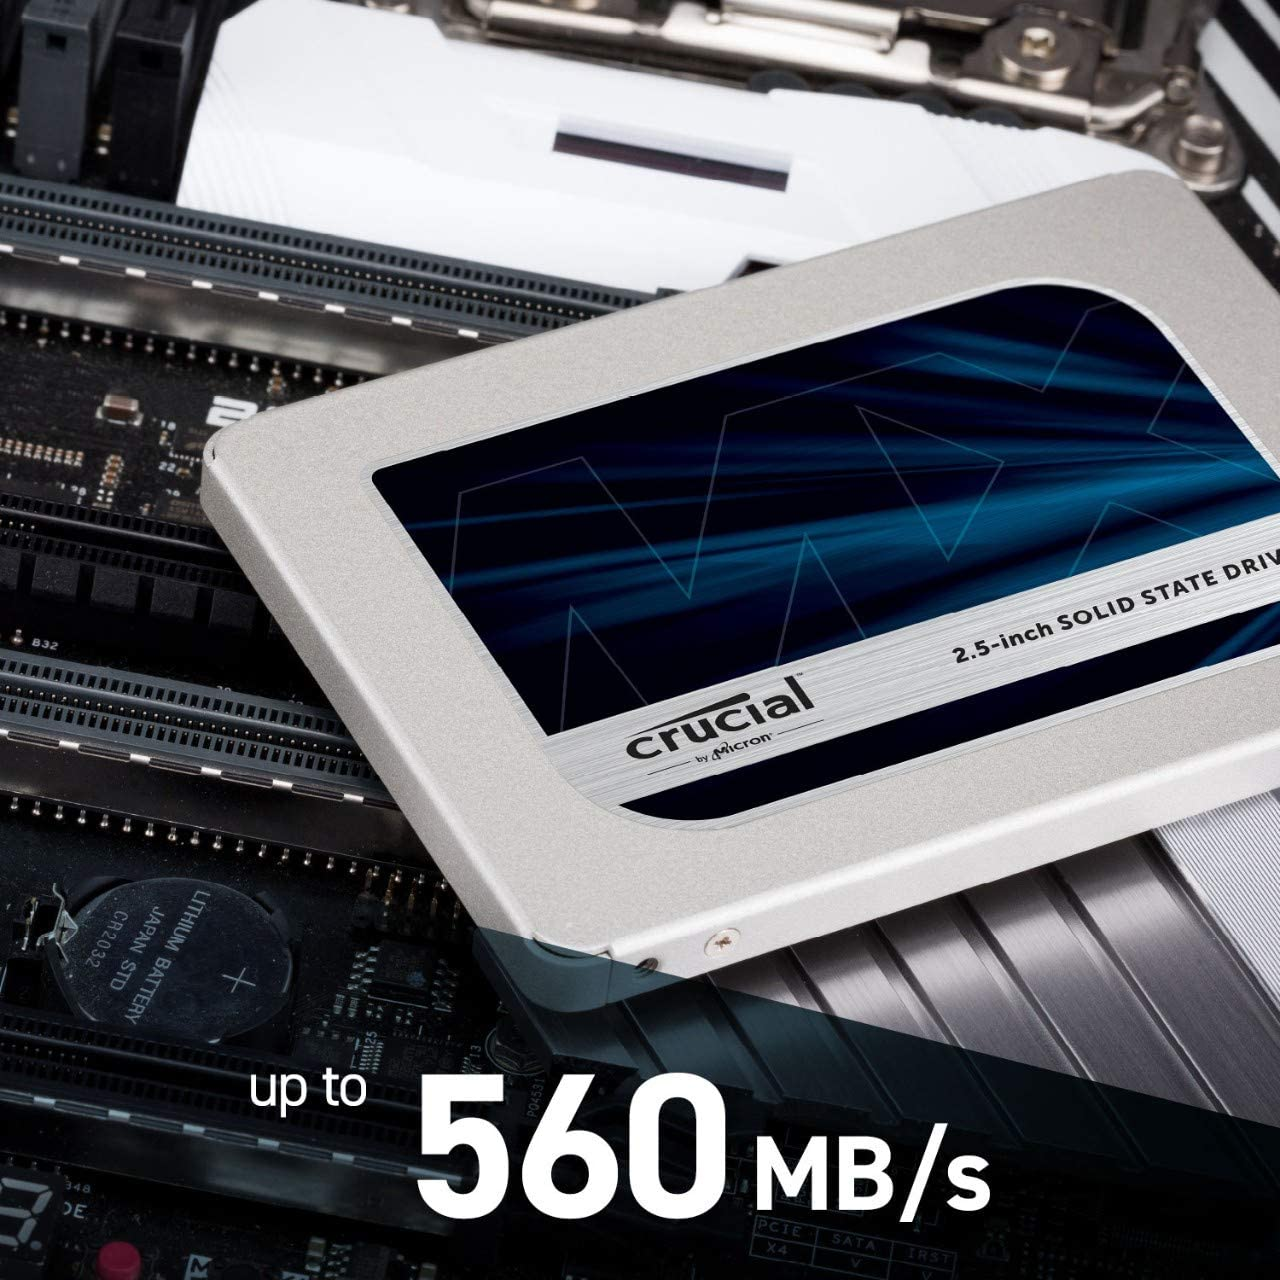 Crucial MX500 250GB 3D NAND SATA 2.5 Inch Internal SSD, up to 560MB/s -  CT250MX500SSD1(Z) 